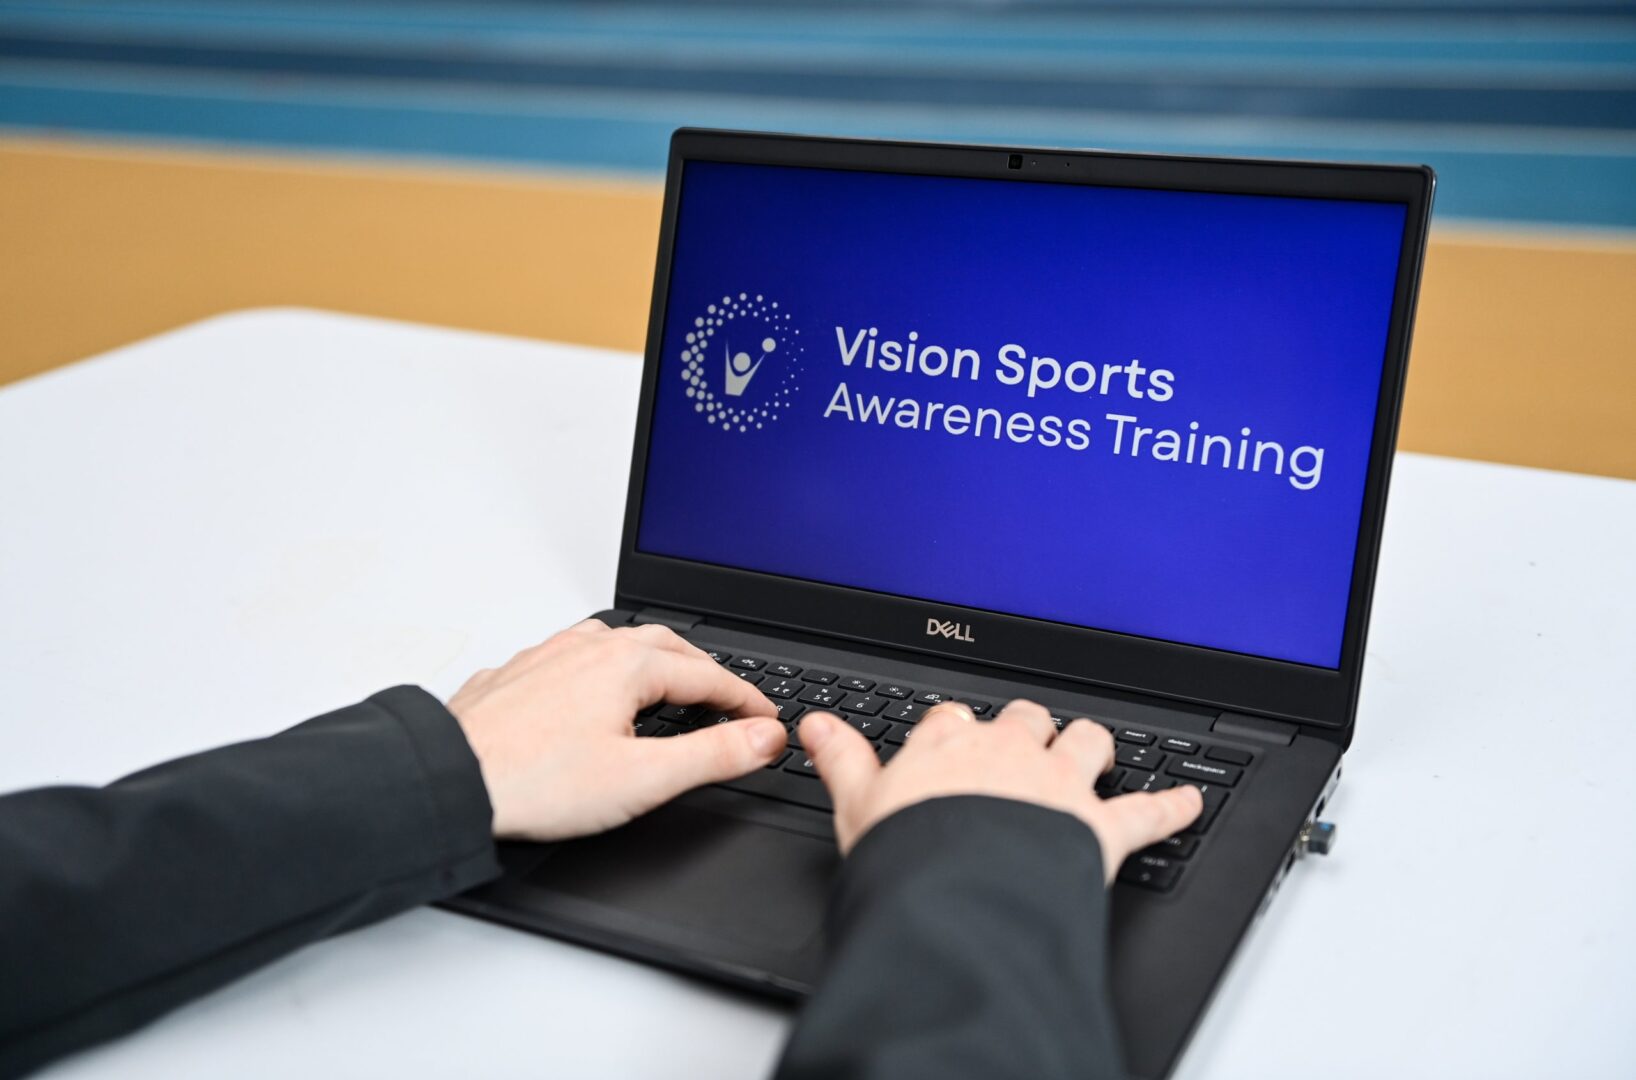 Photo of hands of person on laptop with words Vision Sports Awareness Training on a blue screen.